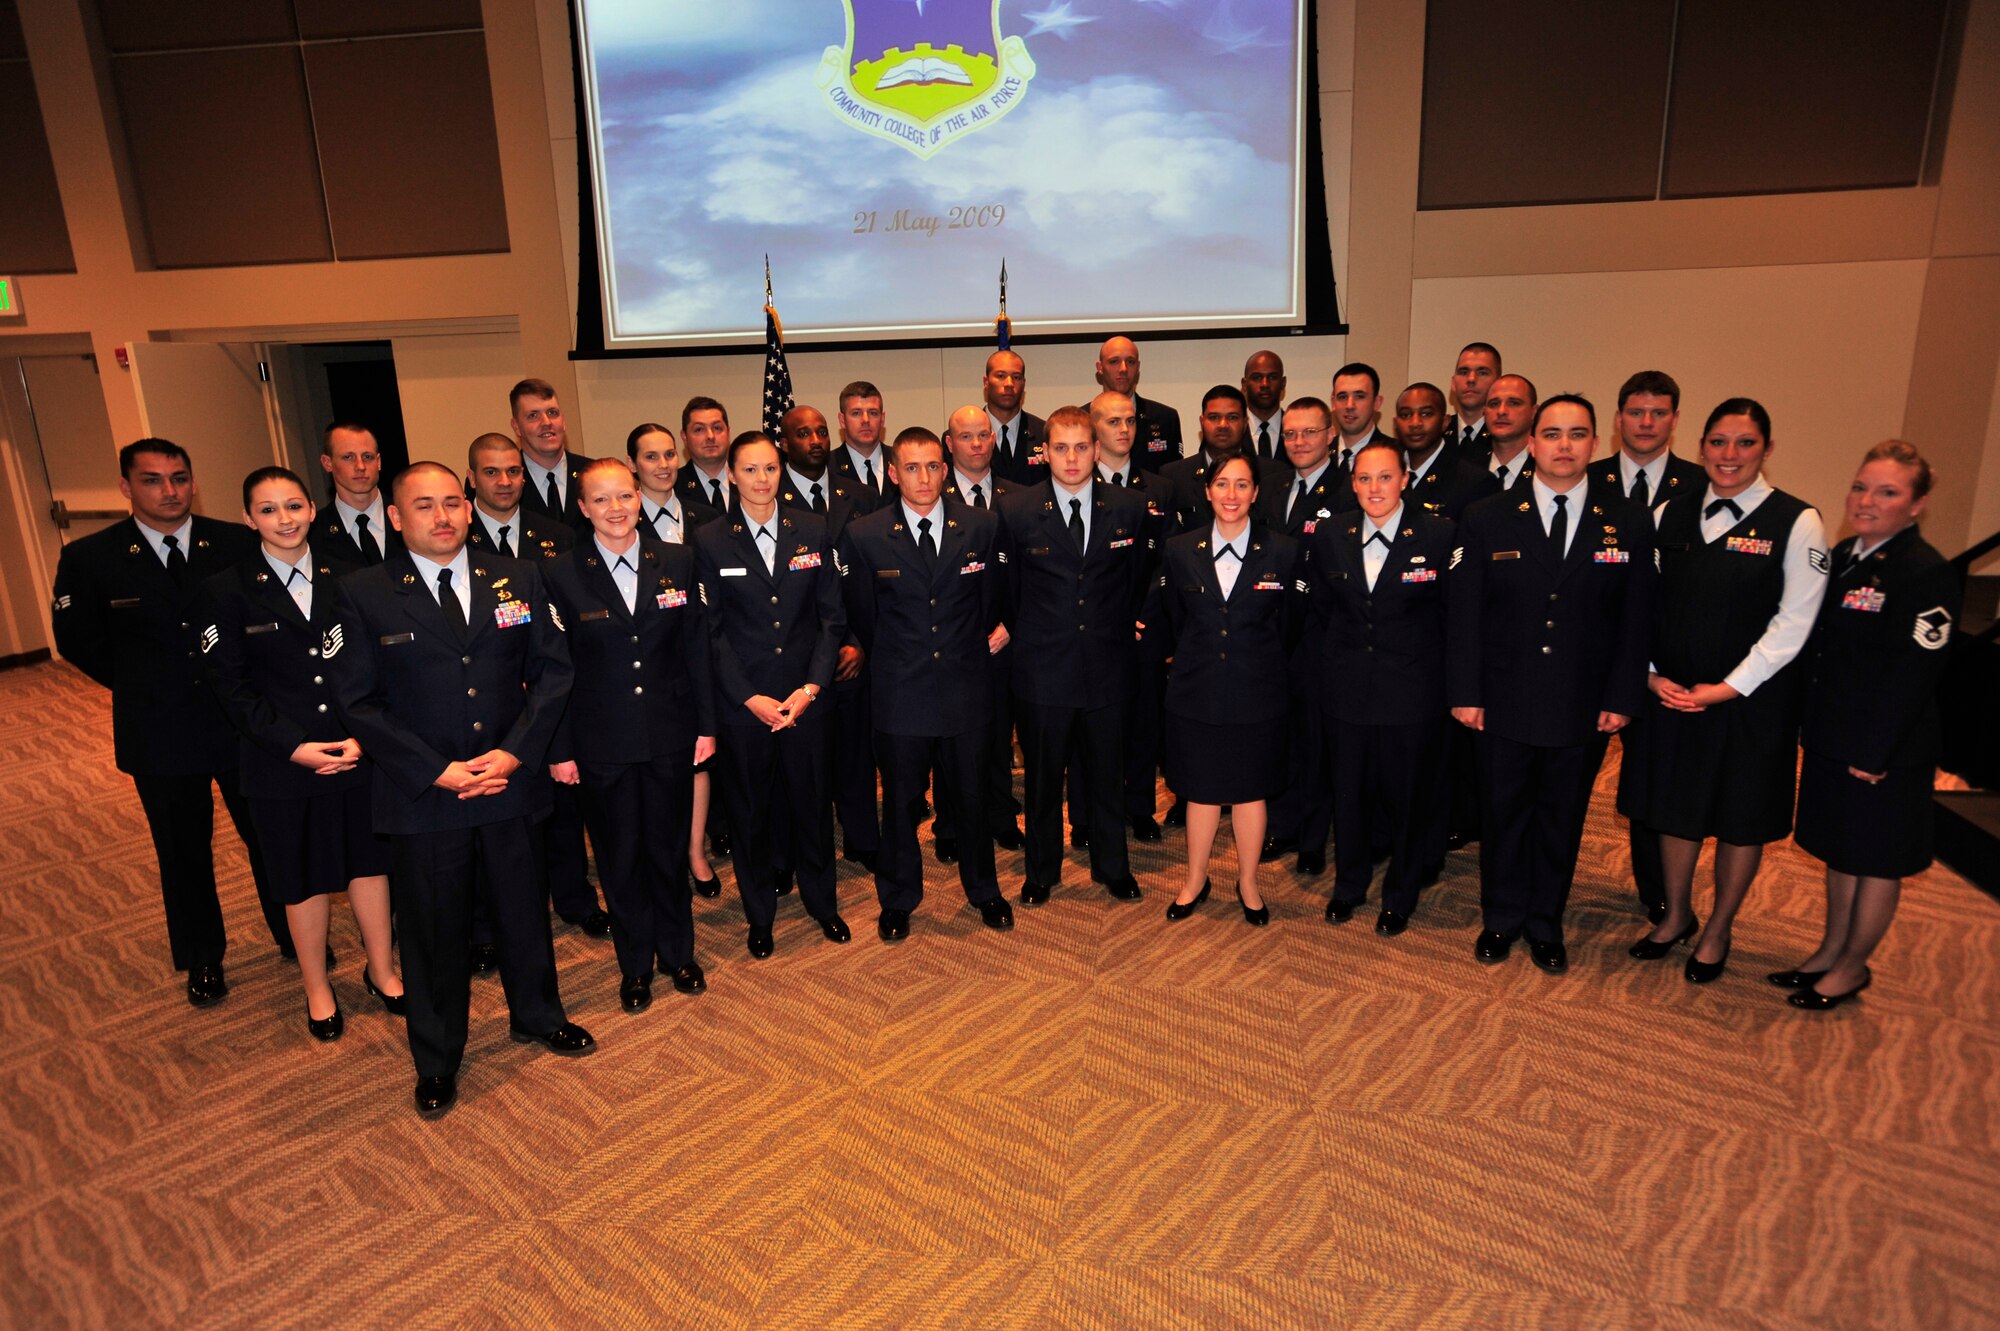 BUCKLEY AIR FORCE BASE, Colo. -- Airmen from across Team Buckley graduated from The Community College of the Air Force, May 21, in a ceremony at the Leadership Development Center here. (U.S. Air Force photo by Senior Airman Alex Gochnour)